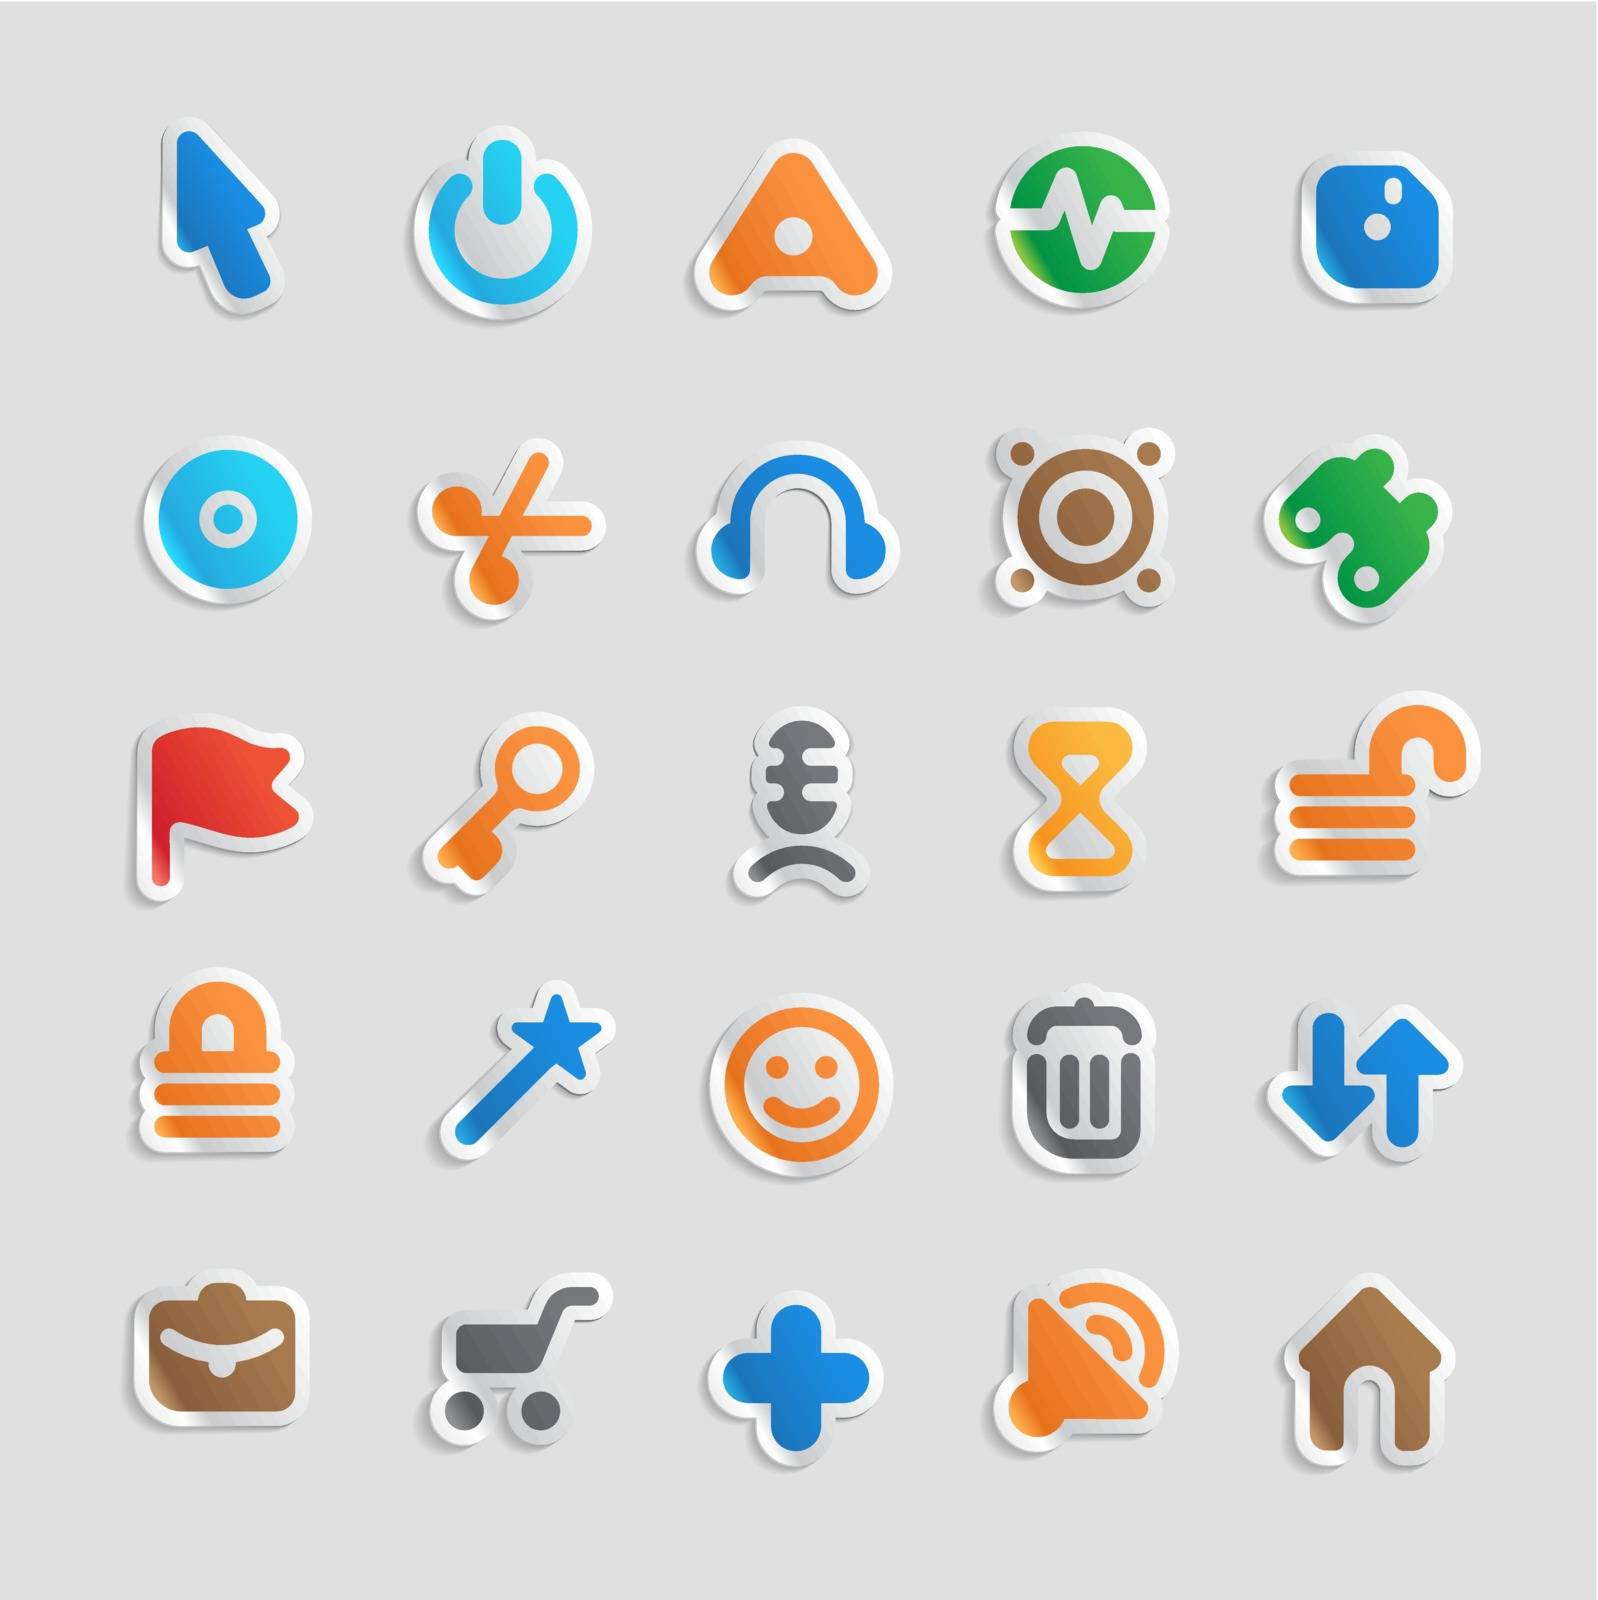 Sticker icons for interface by ildogesto